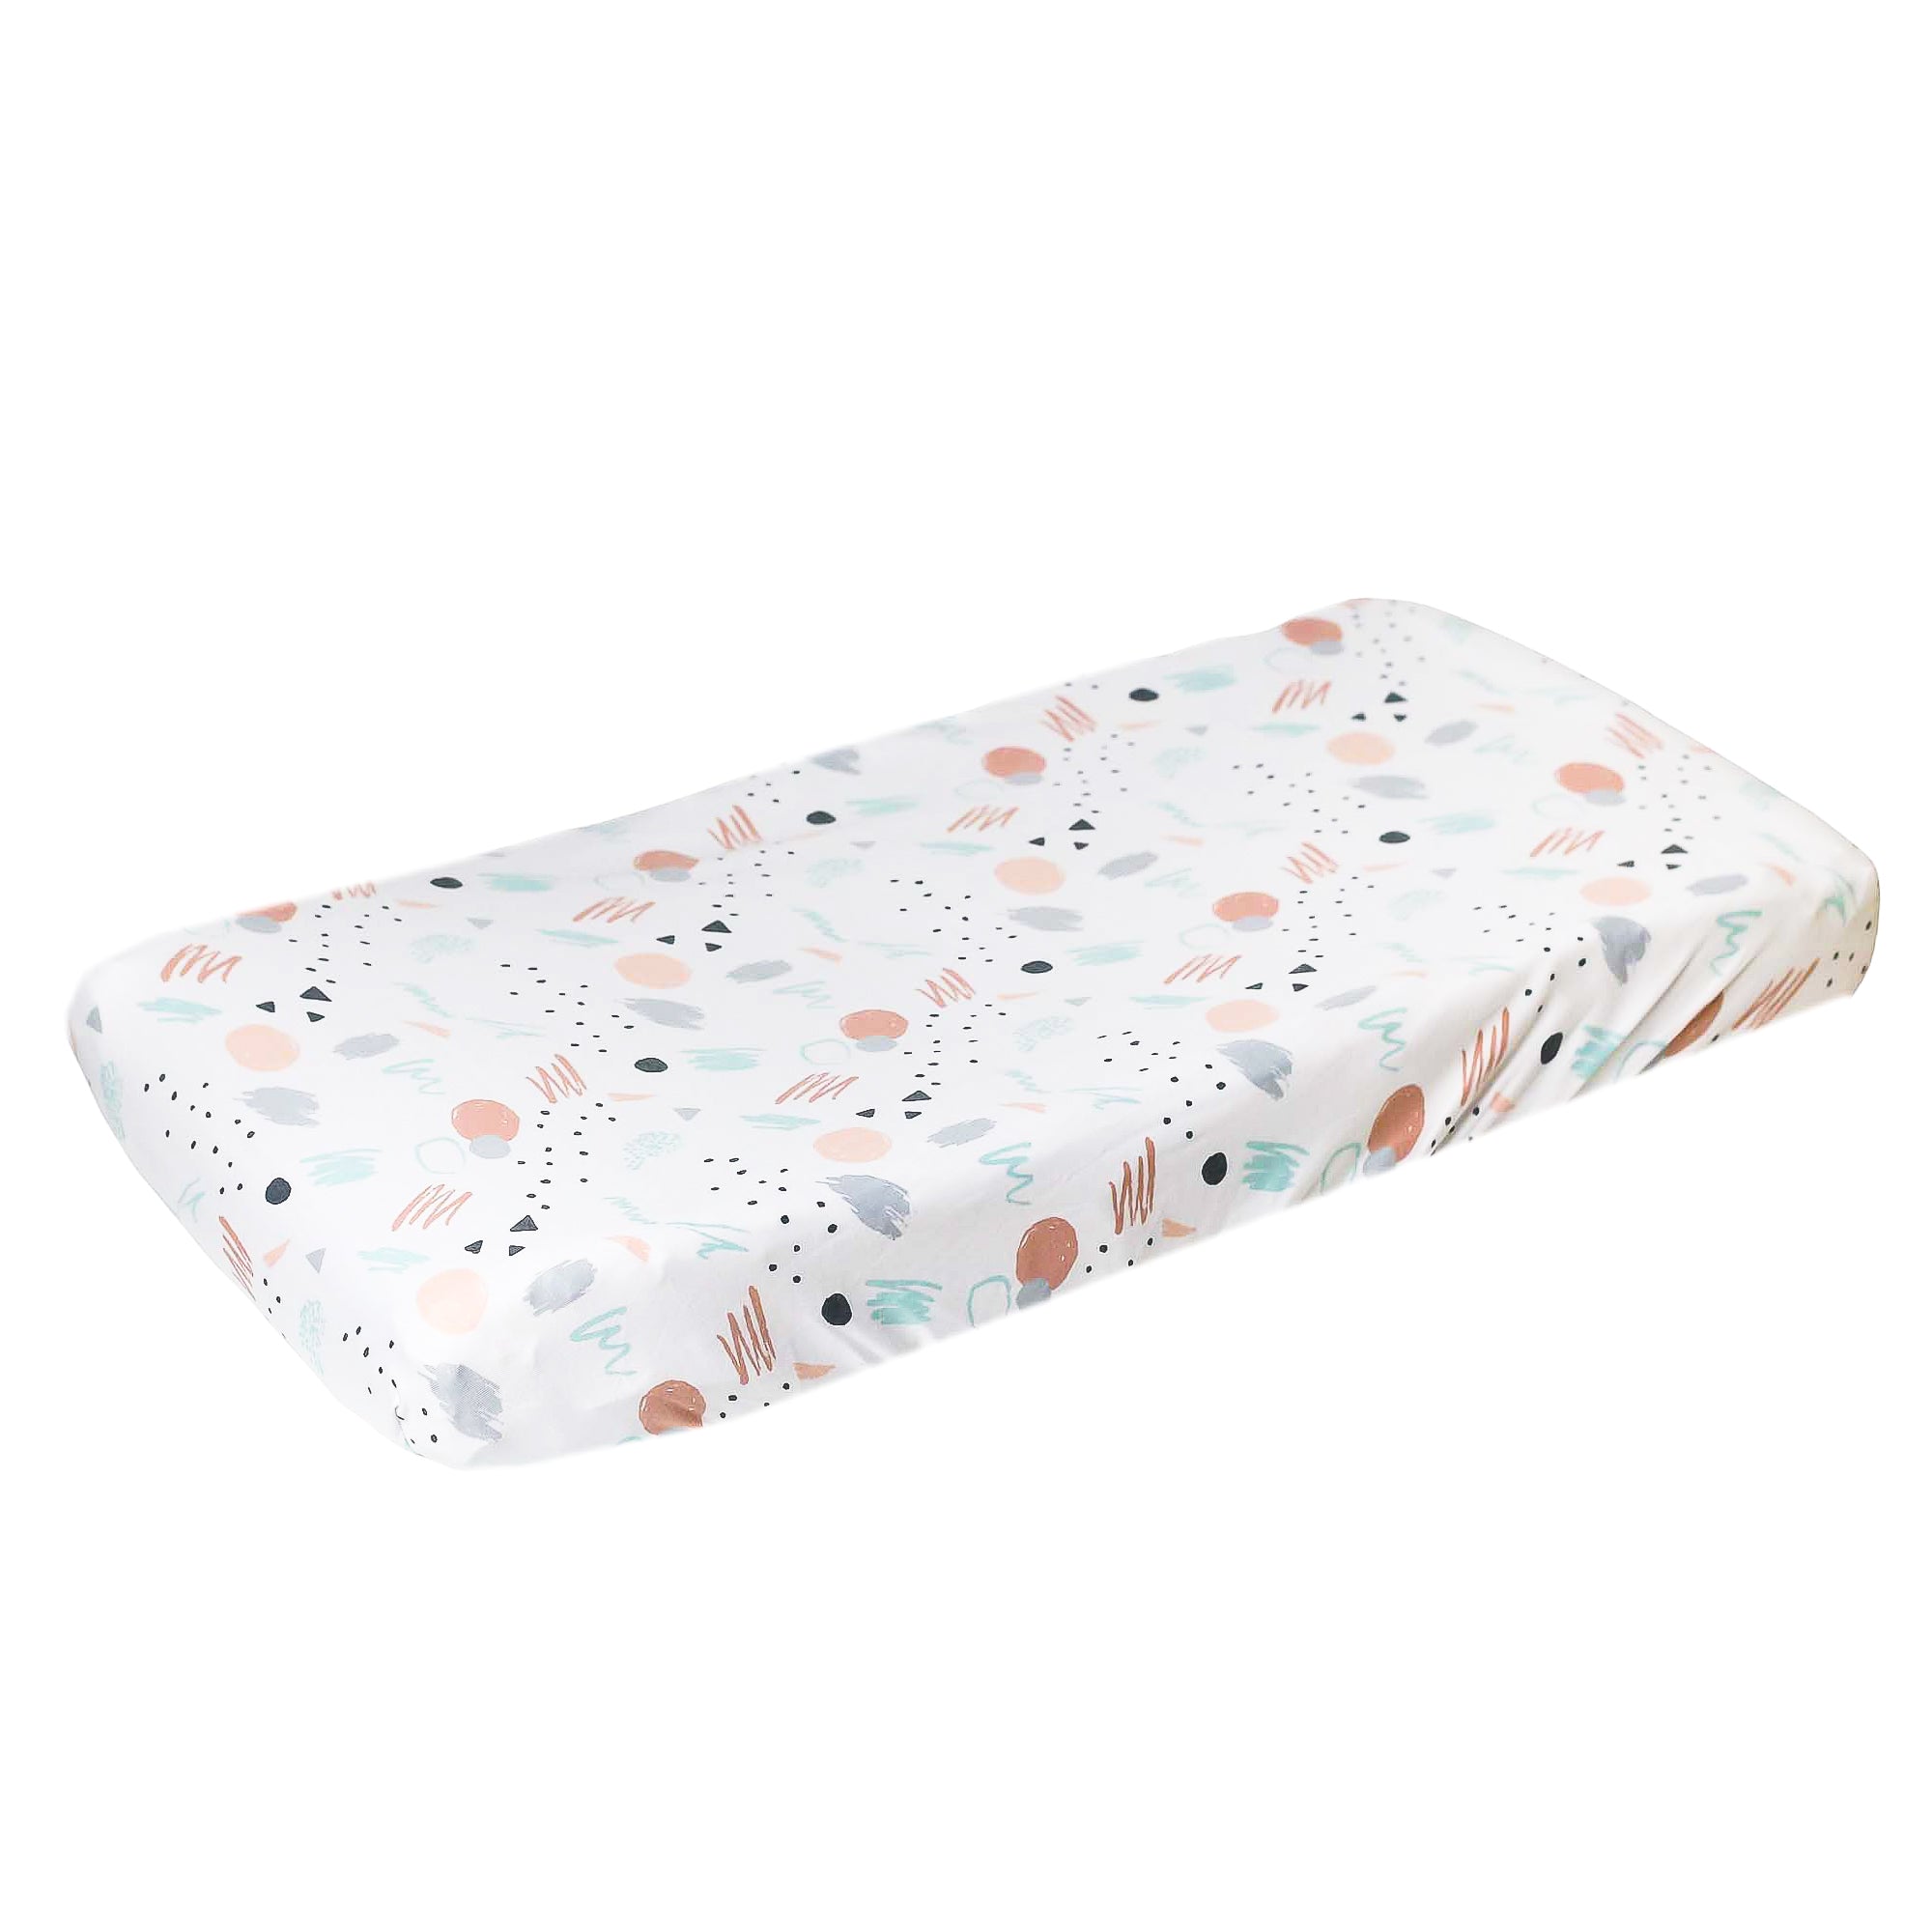 Premium Knit Diaper Changing Pad Cover - Bayside